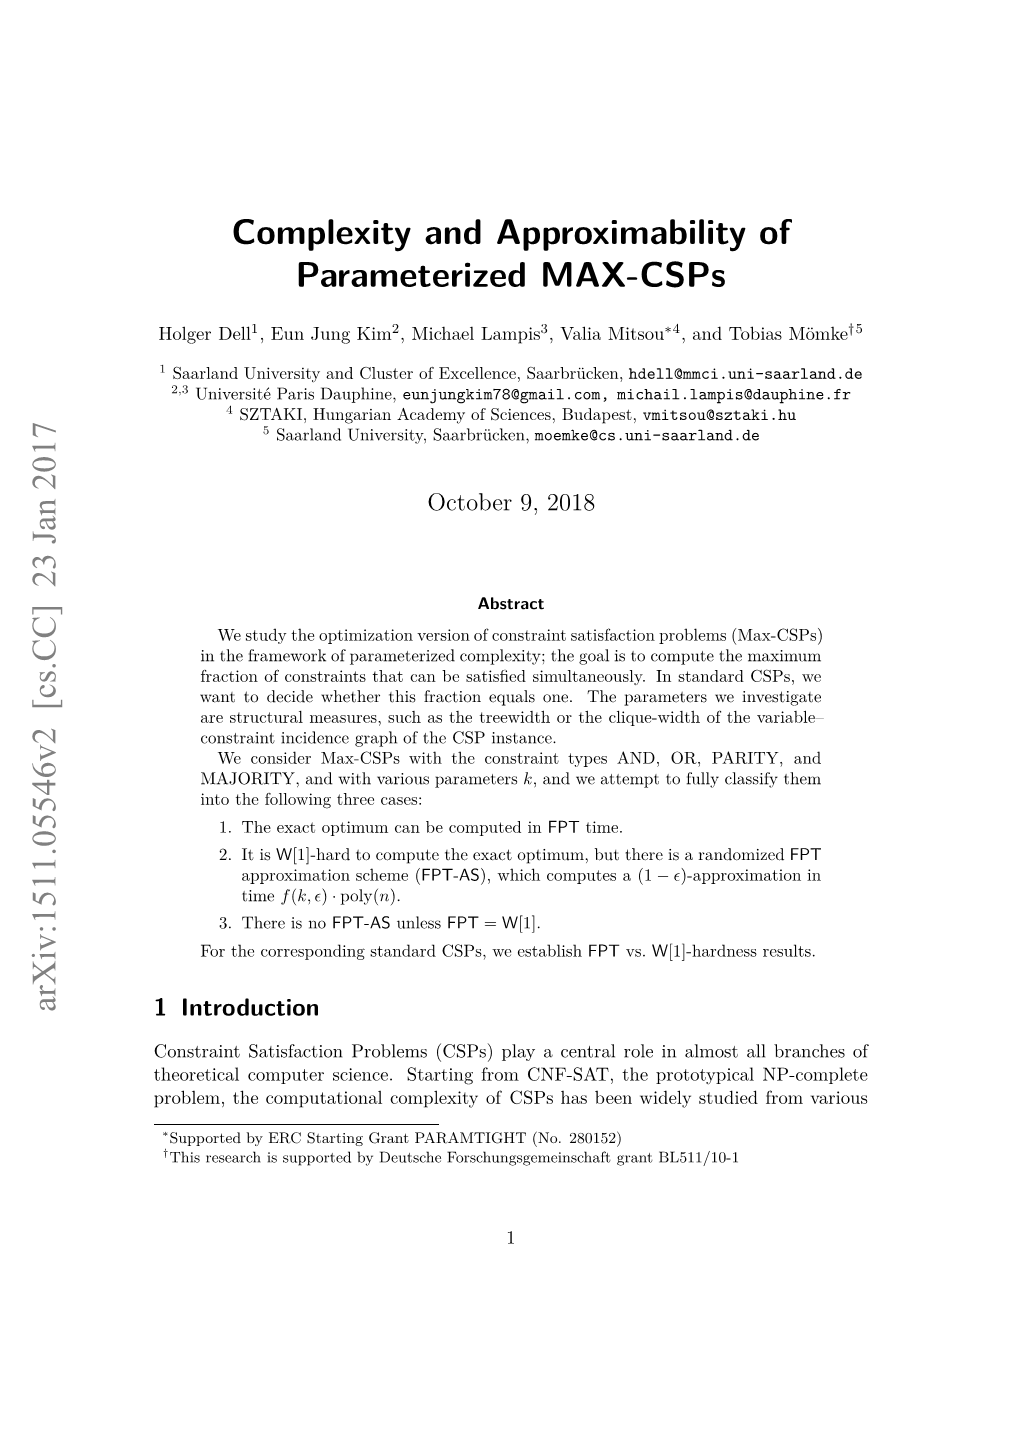 Complexity and Approximability of Parameterized MAX-Csps